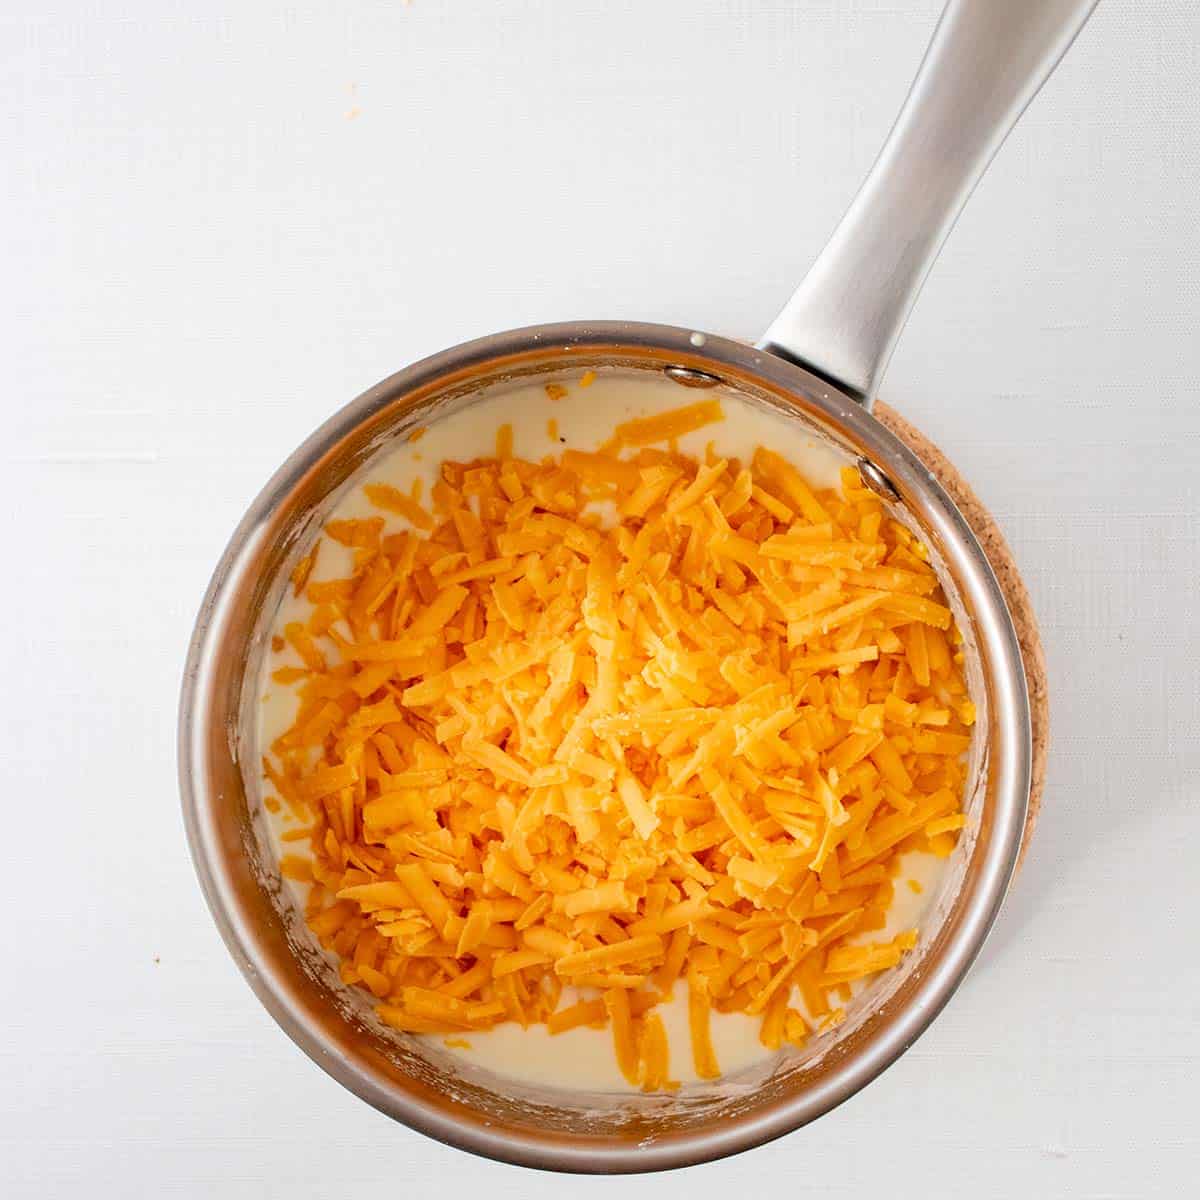 shredded cheese added to cream mixture in saucepan.